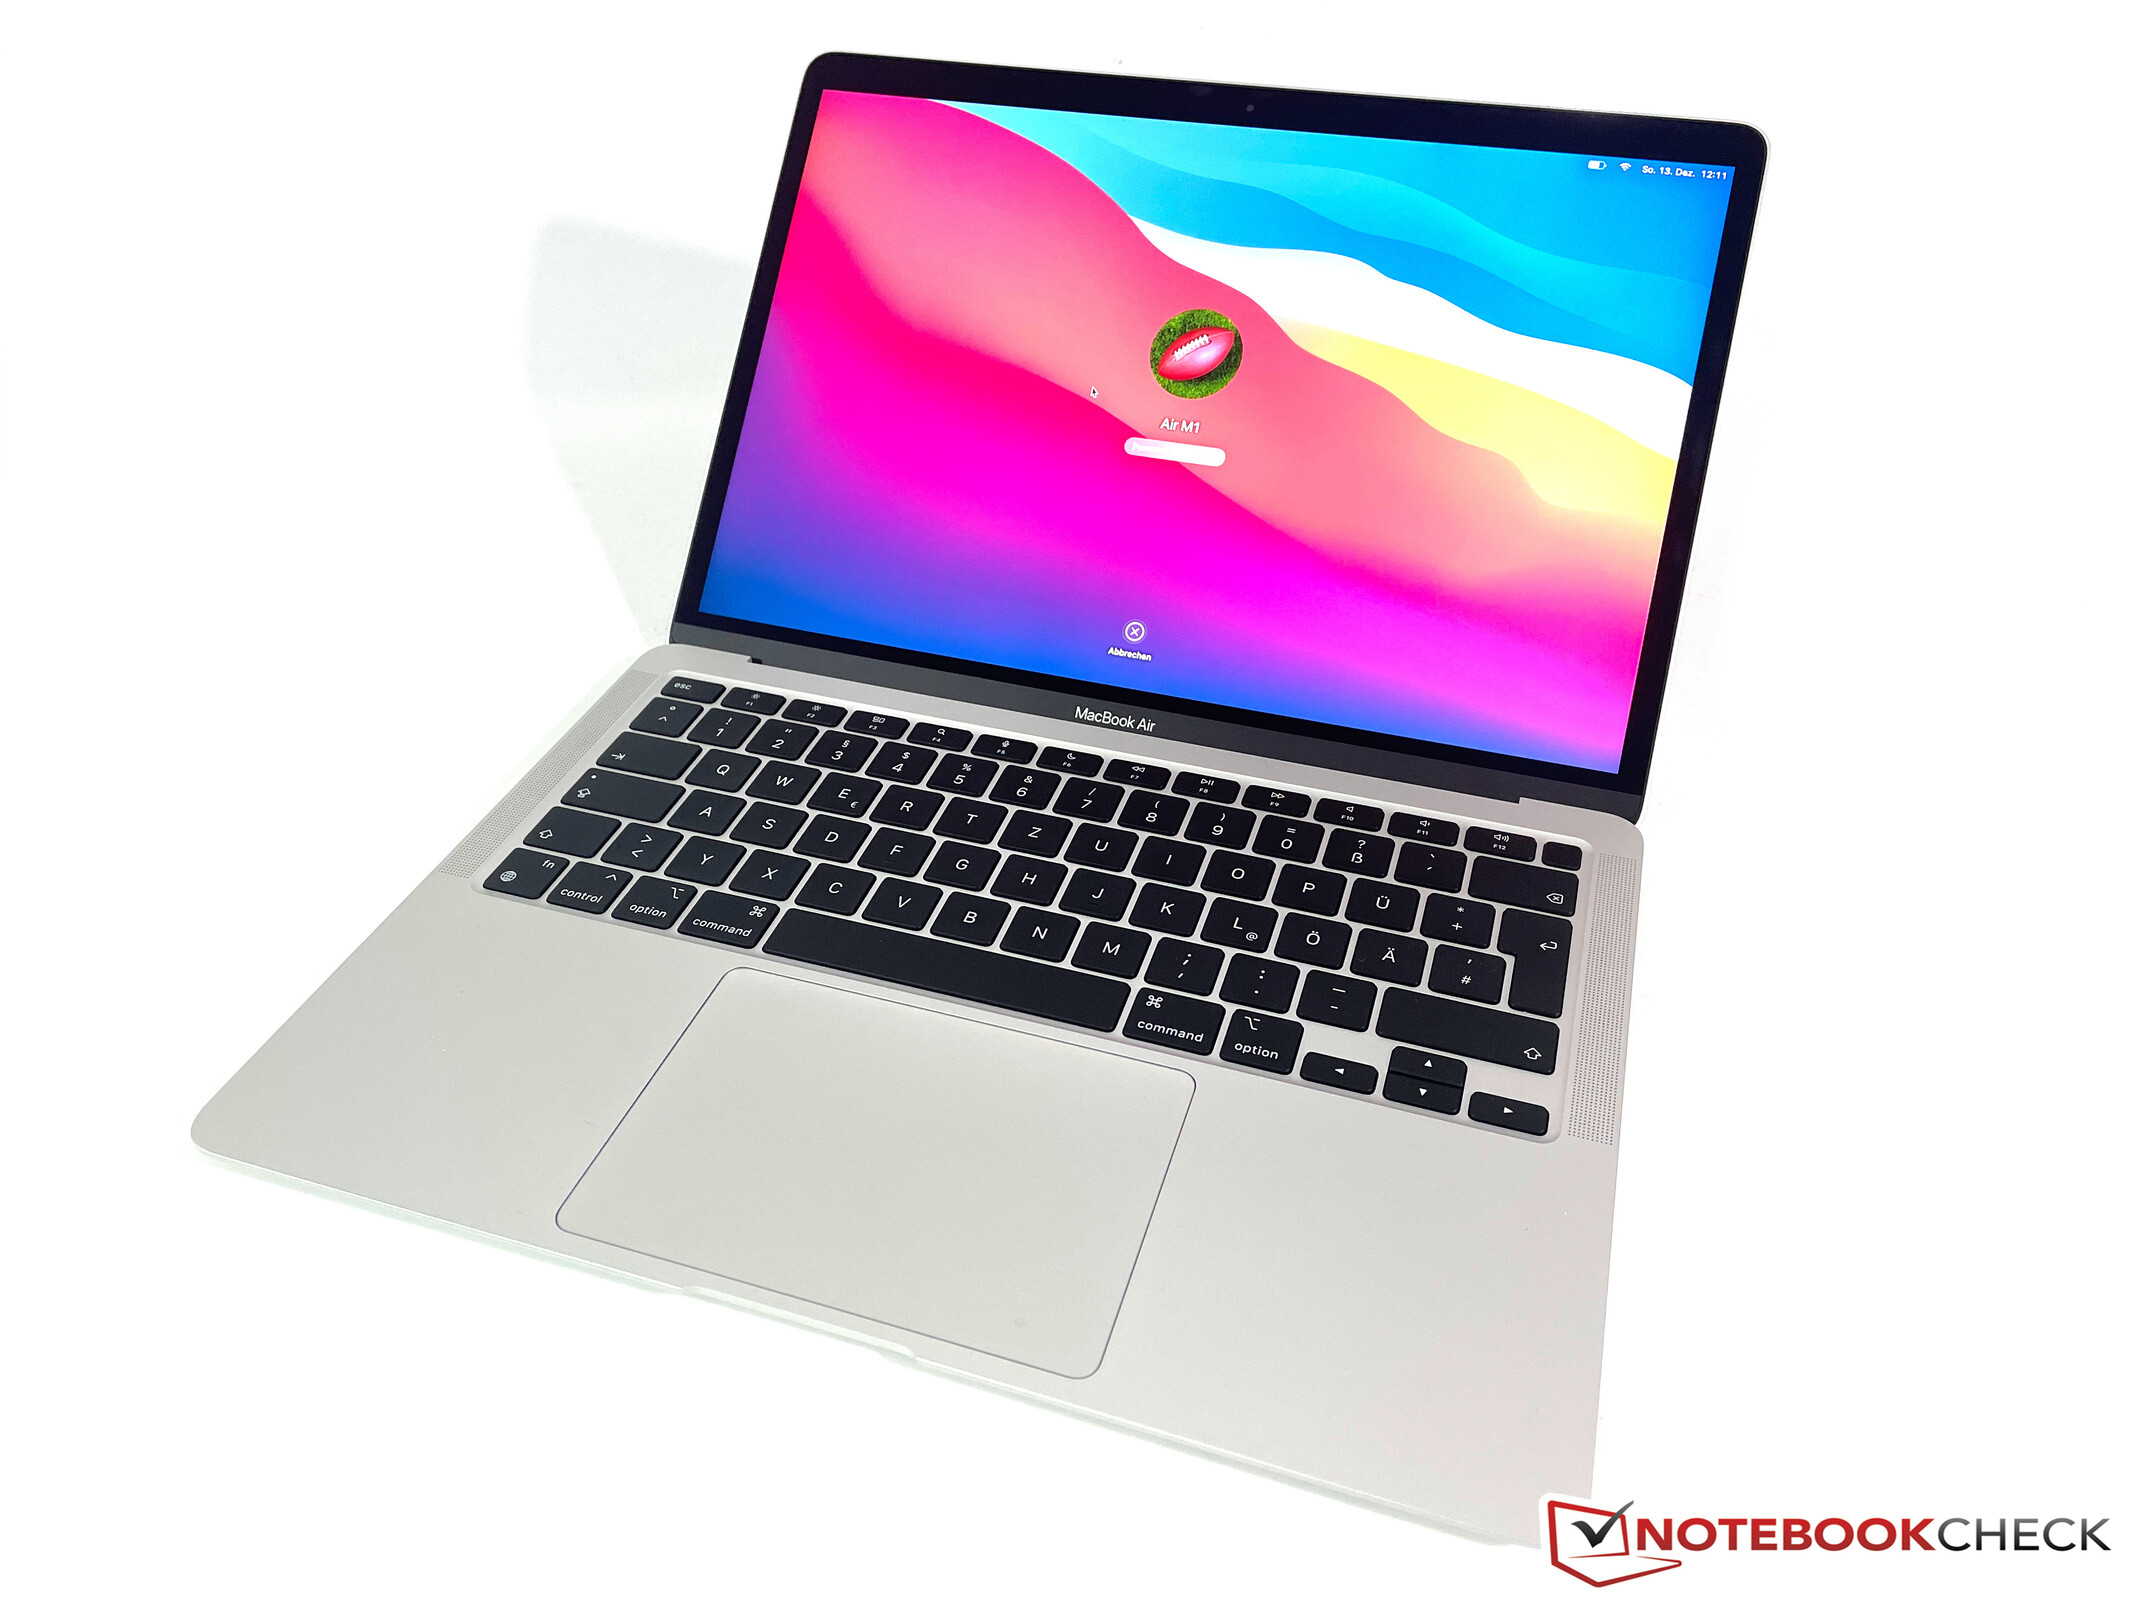 Apple's MacBook Air M1 ist still shipped with the faster 256 GB 